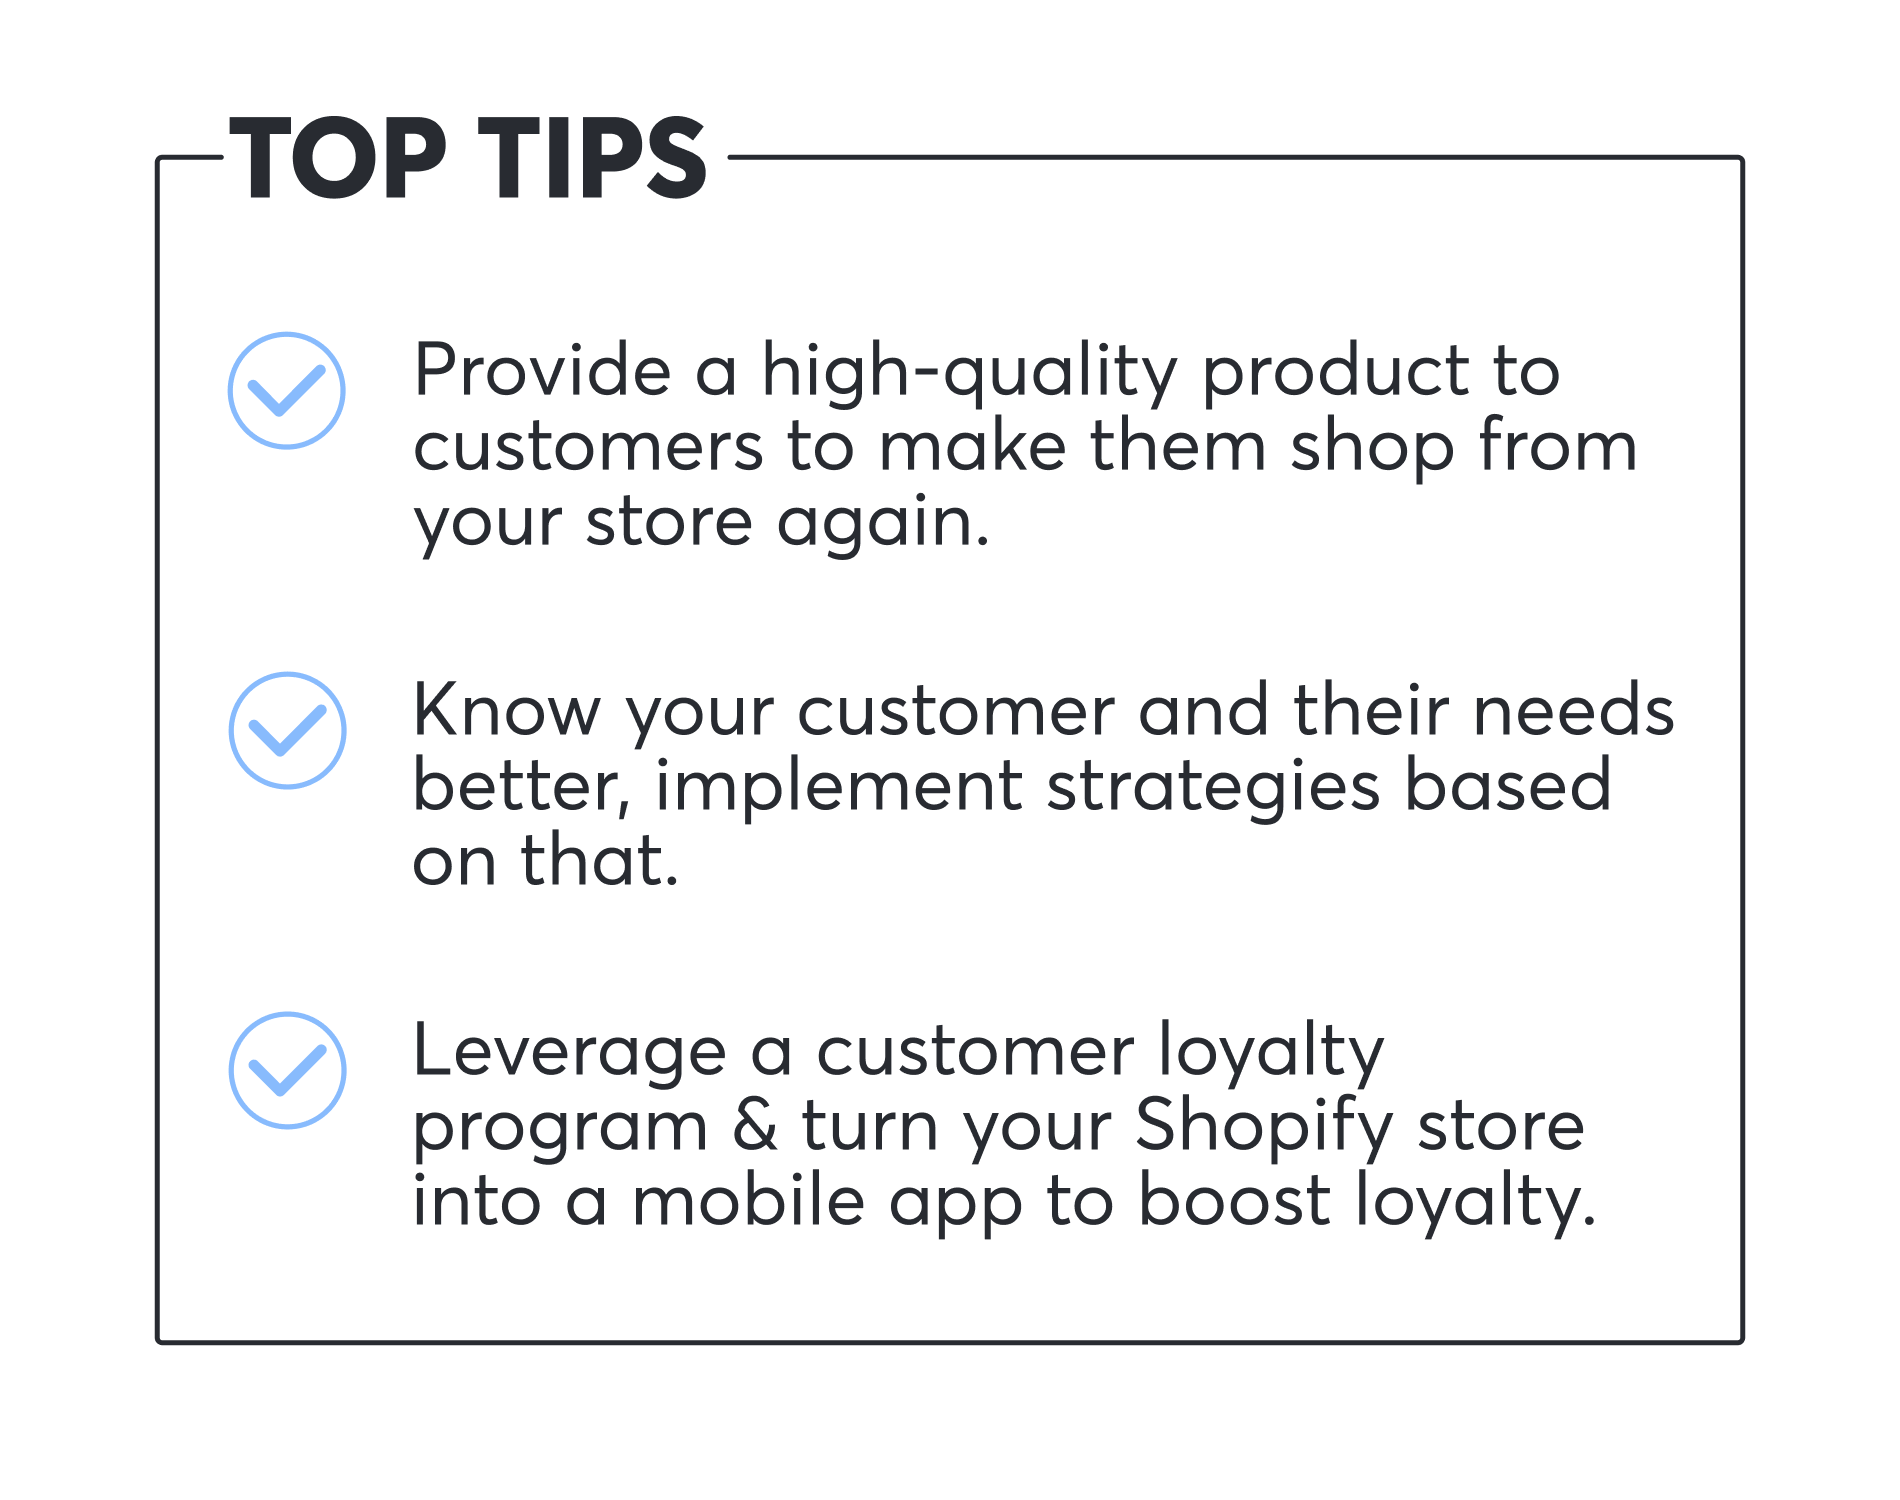 Top Tips to Optimize the Loyalty & Advocacy Stage of the Shopify Funnel